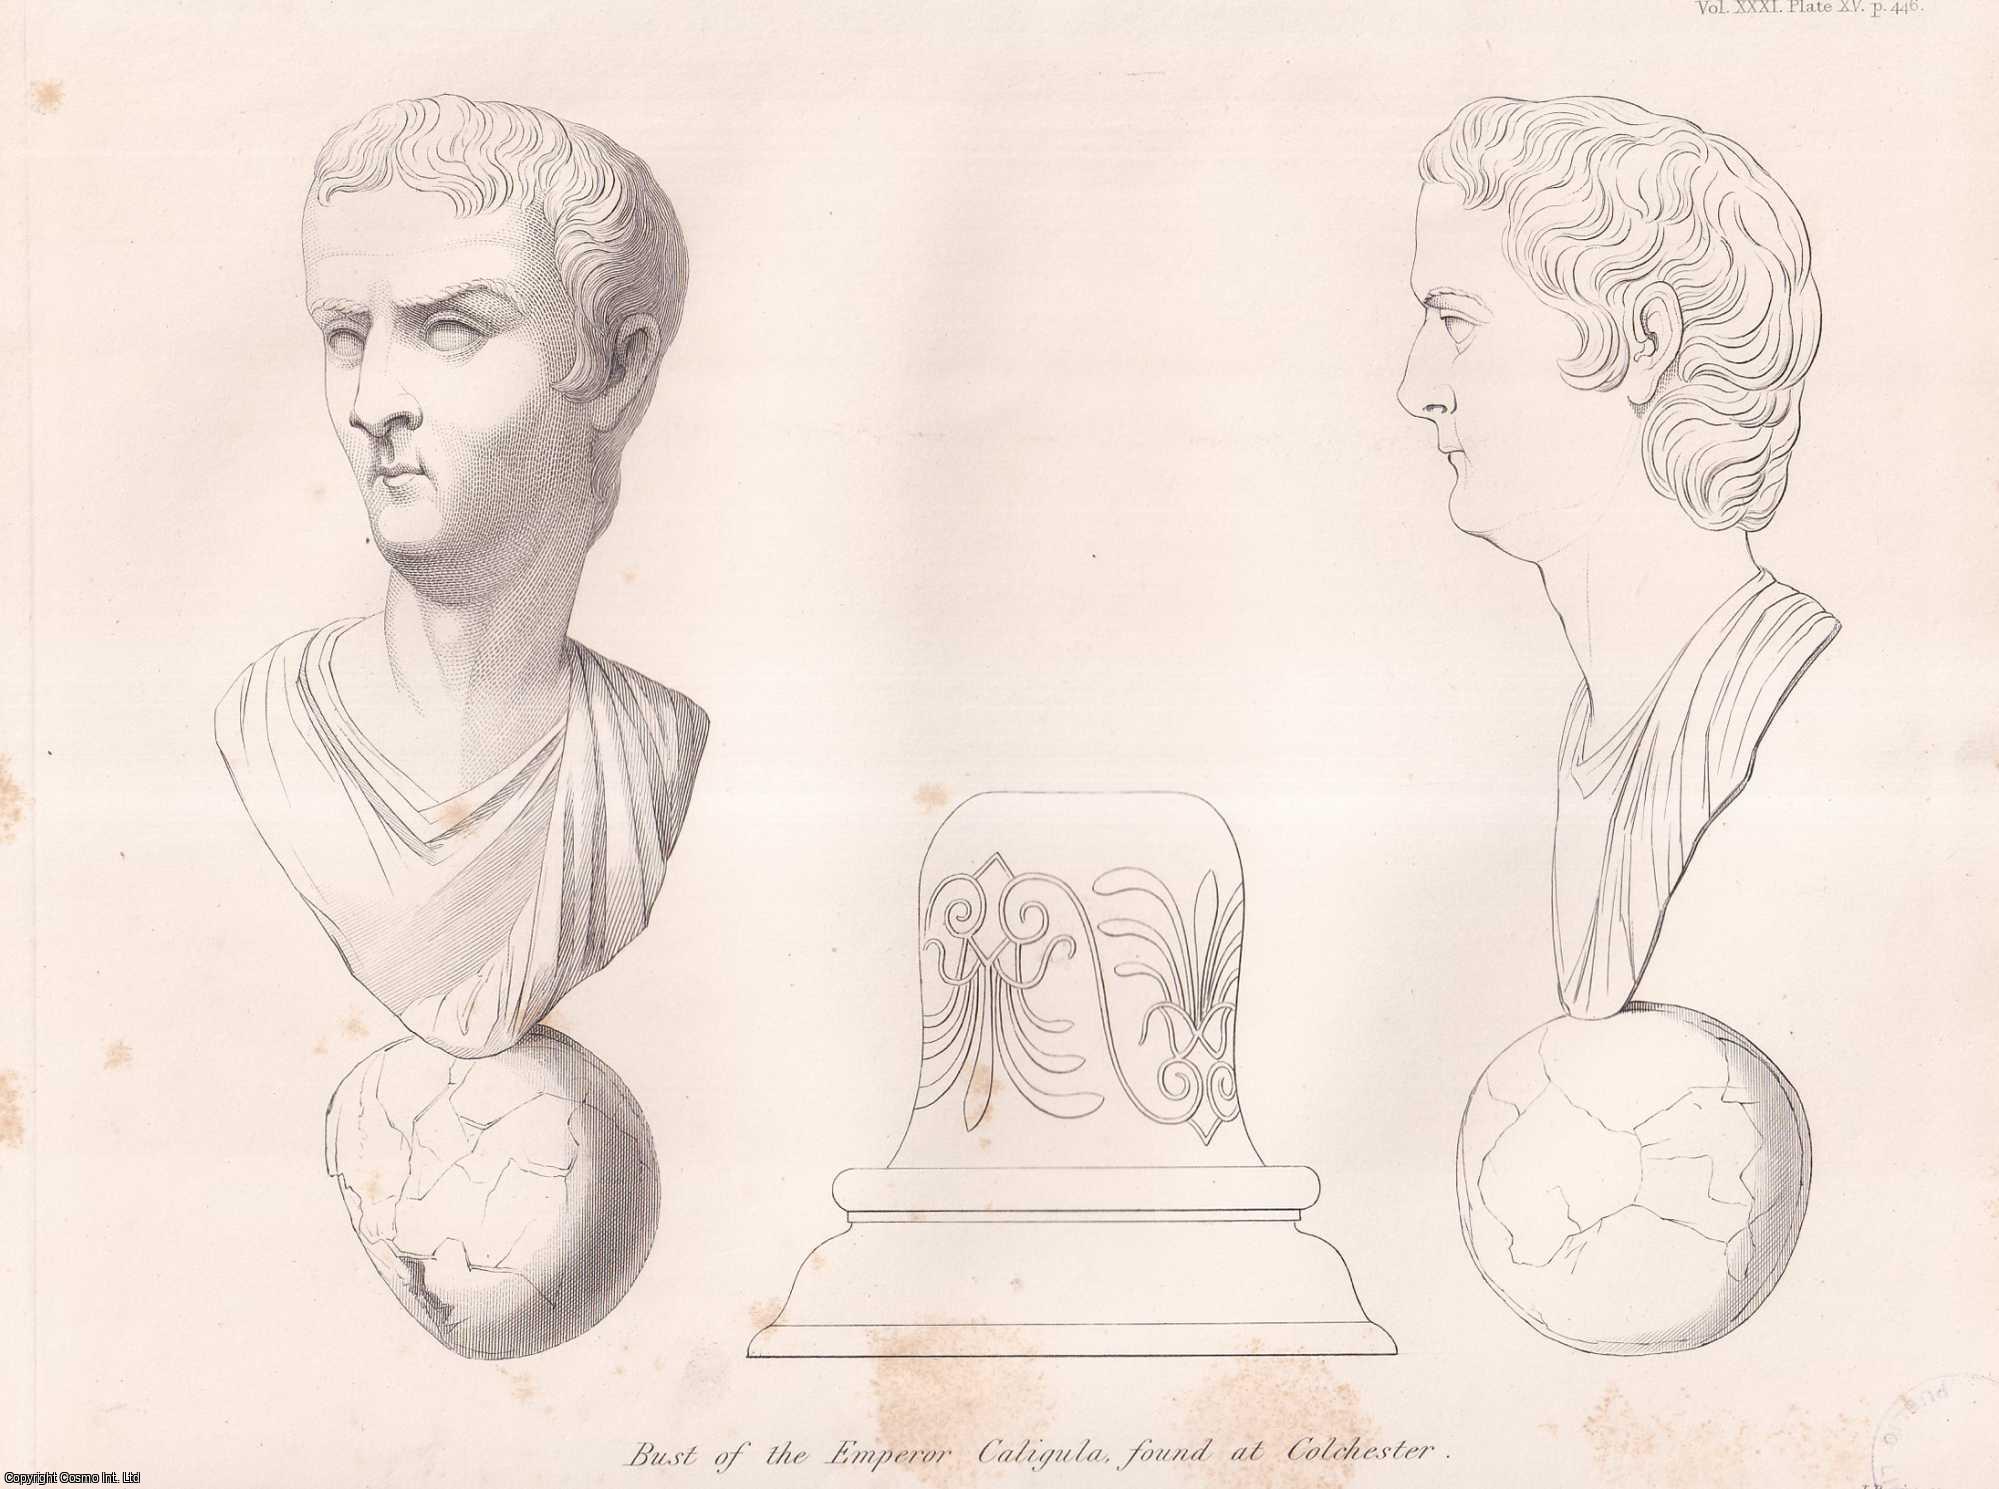 Charles Newton, Esq. - A Description of four Bronzes found at Colchester: from the Collection of Henry Vint, Esq. An uncommon original article from the journal Archaeologia, 1846.